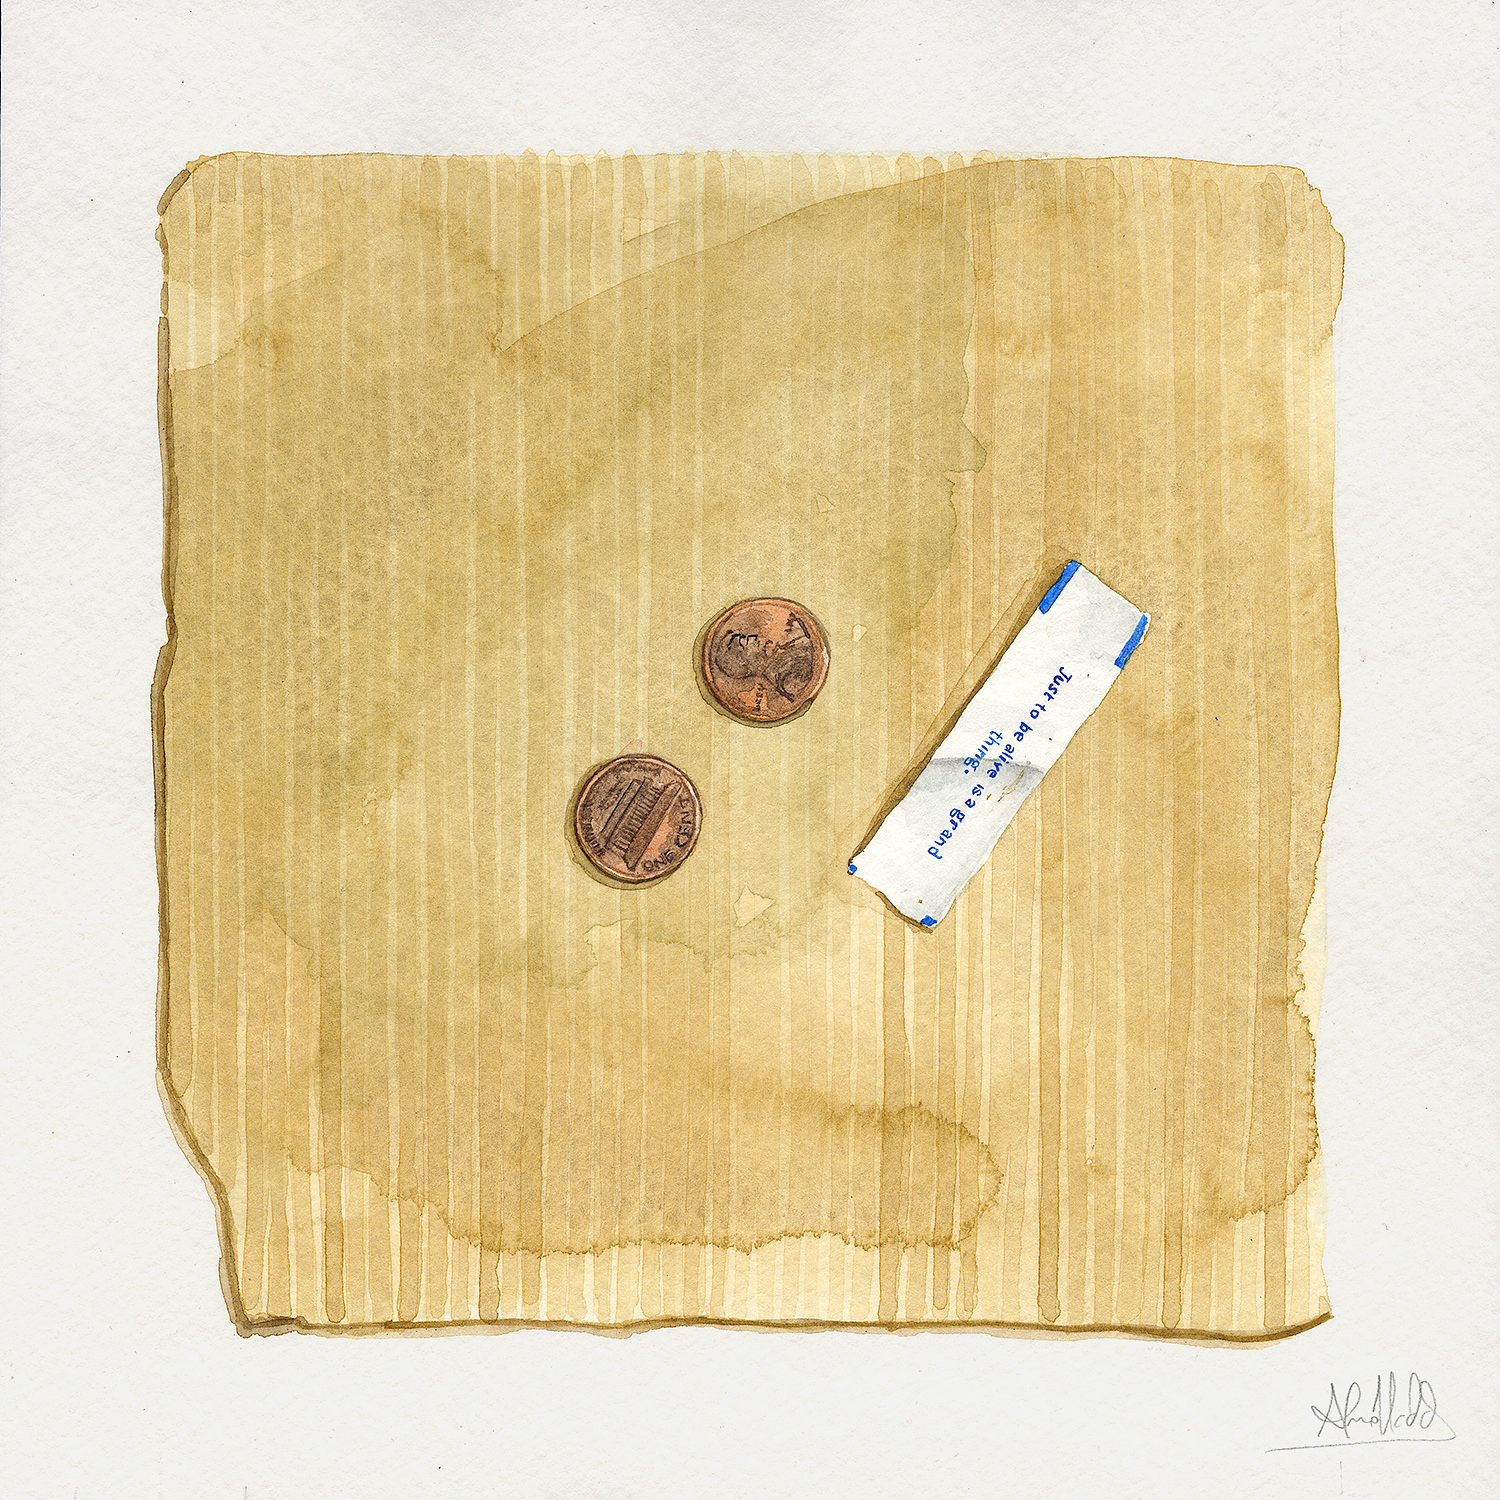 Alvaro Naddeo, Two Cents, 2015. Watercolor on paper, 9 x 9 in.